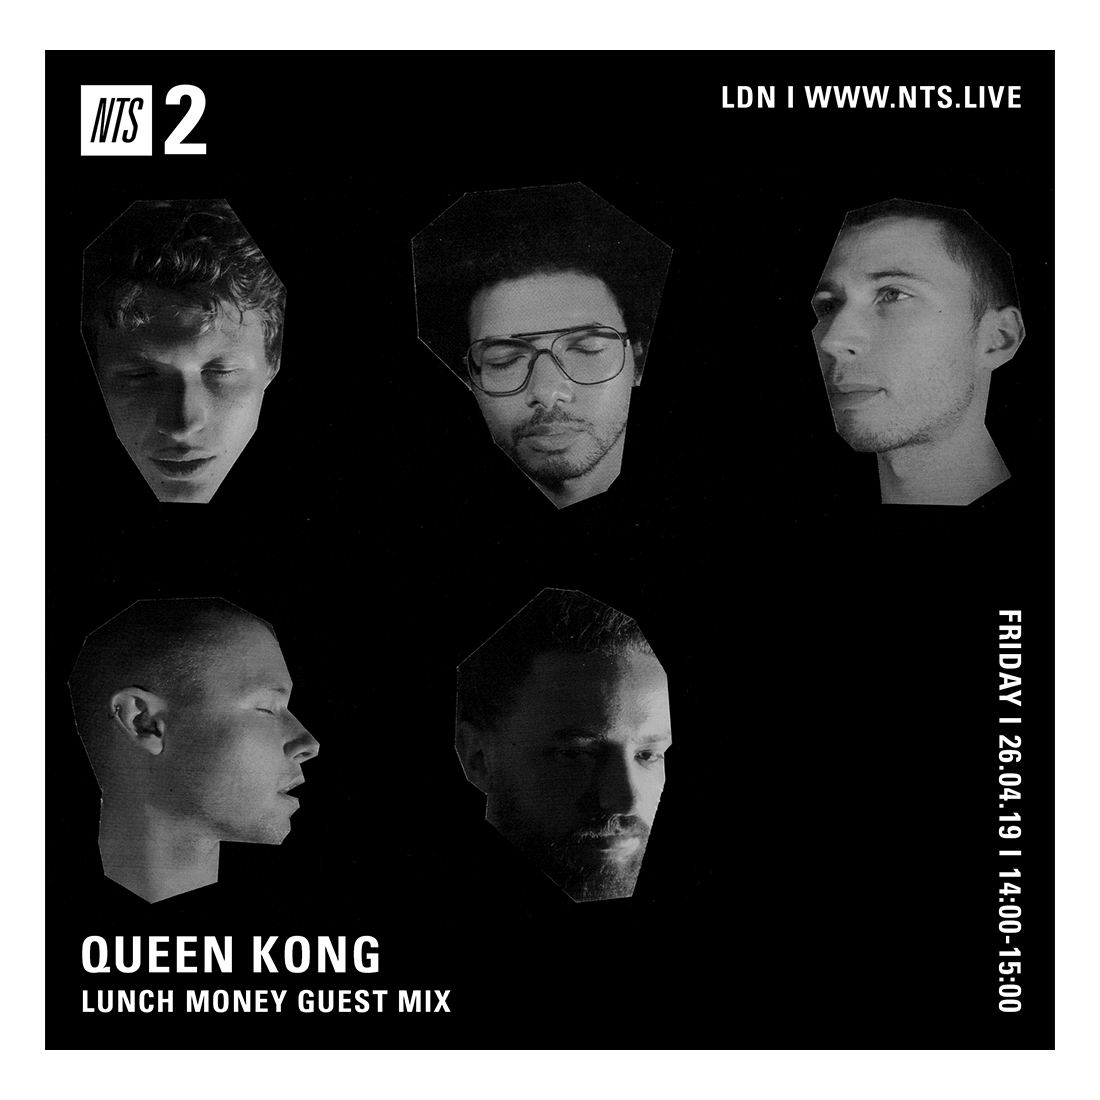 Lunch Money Life on NTS Live